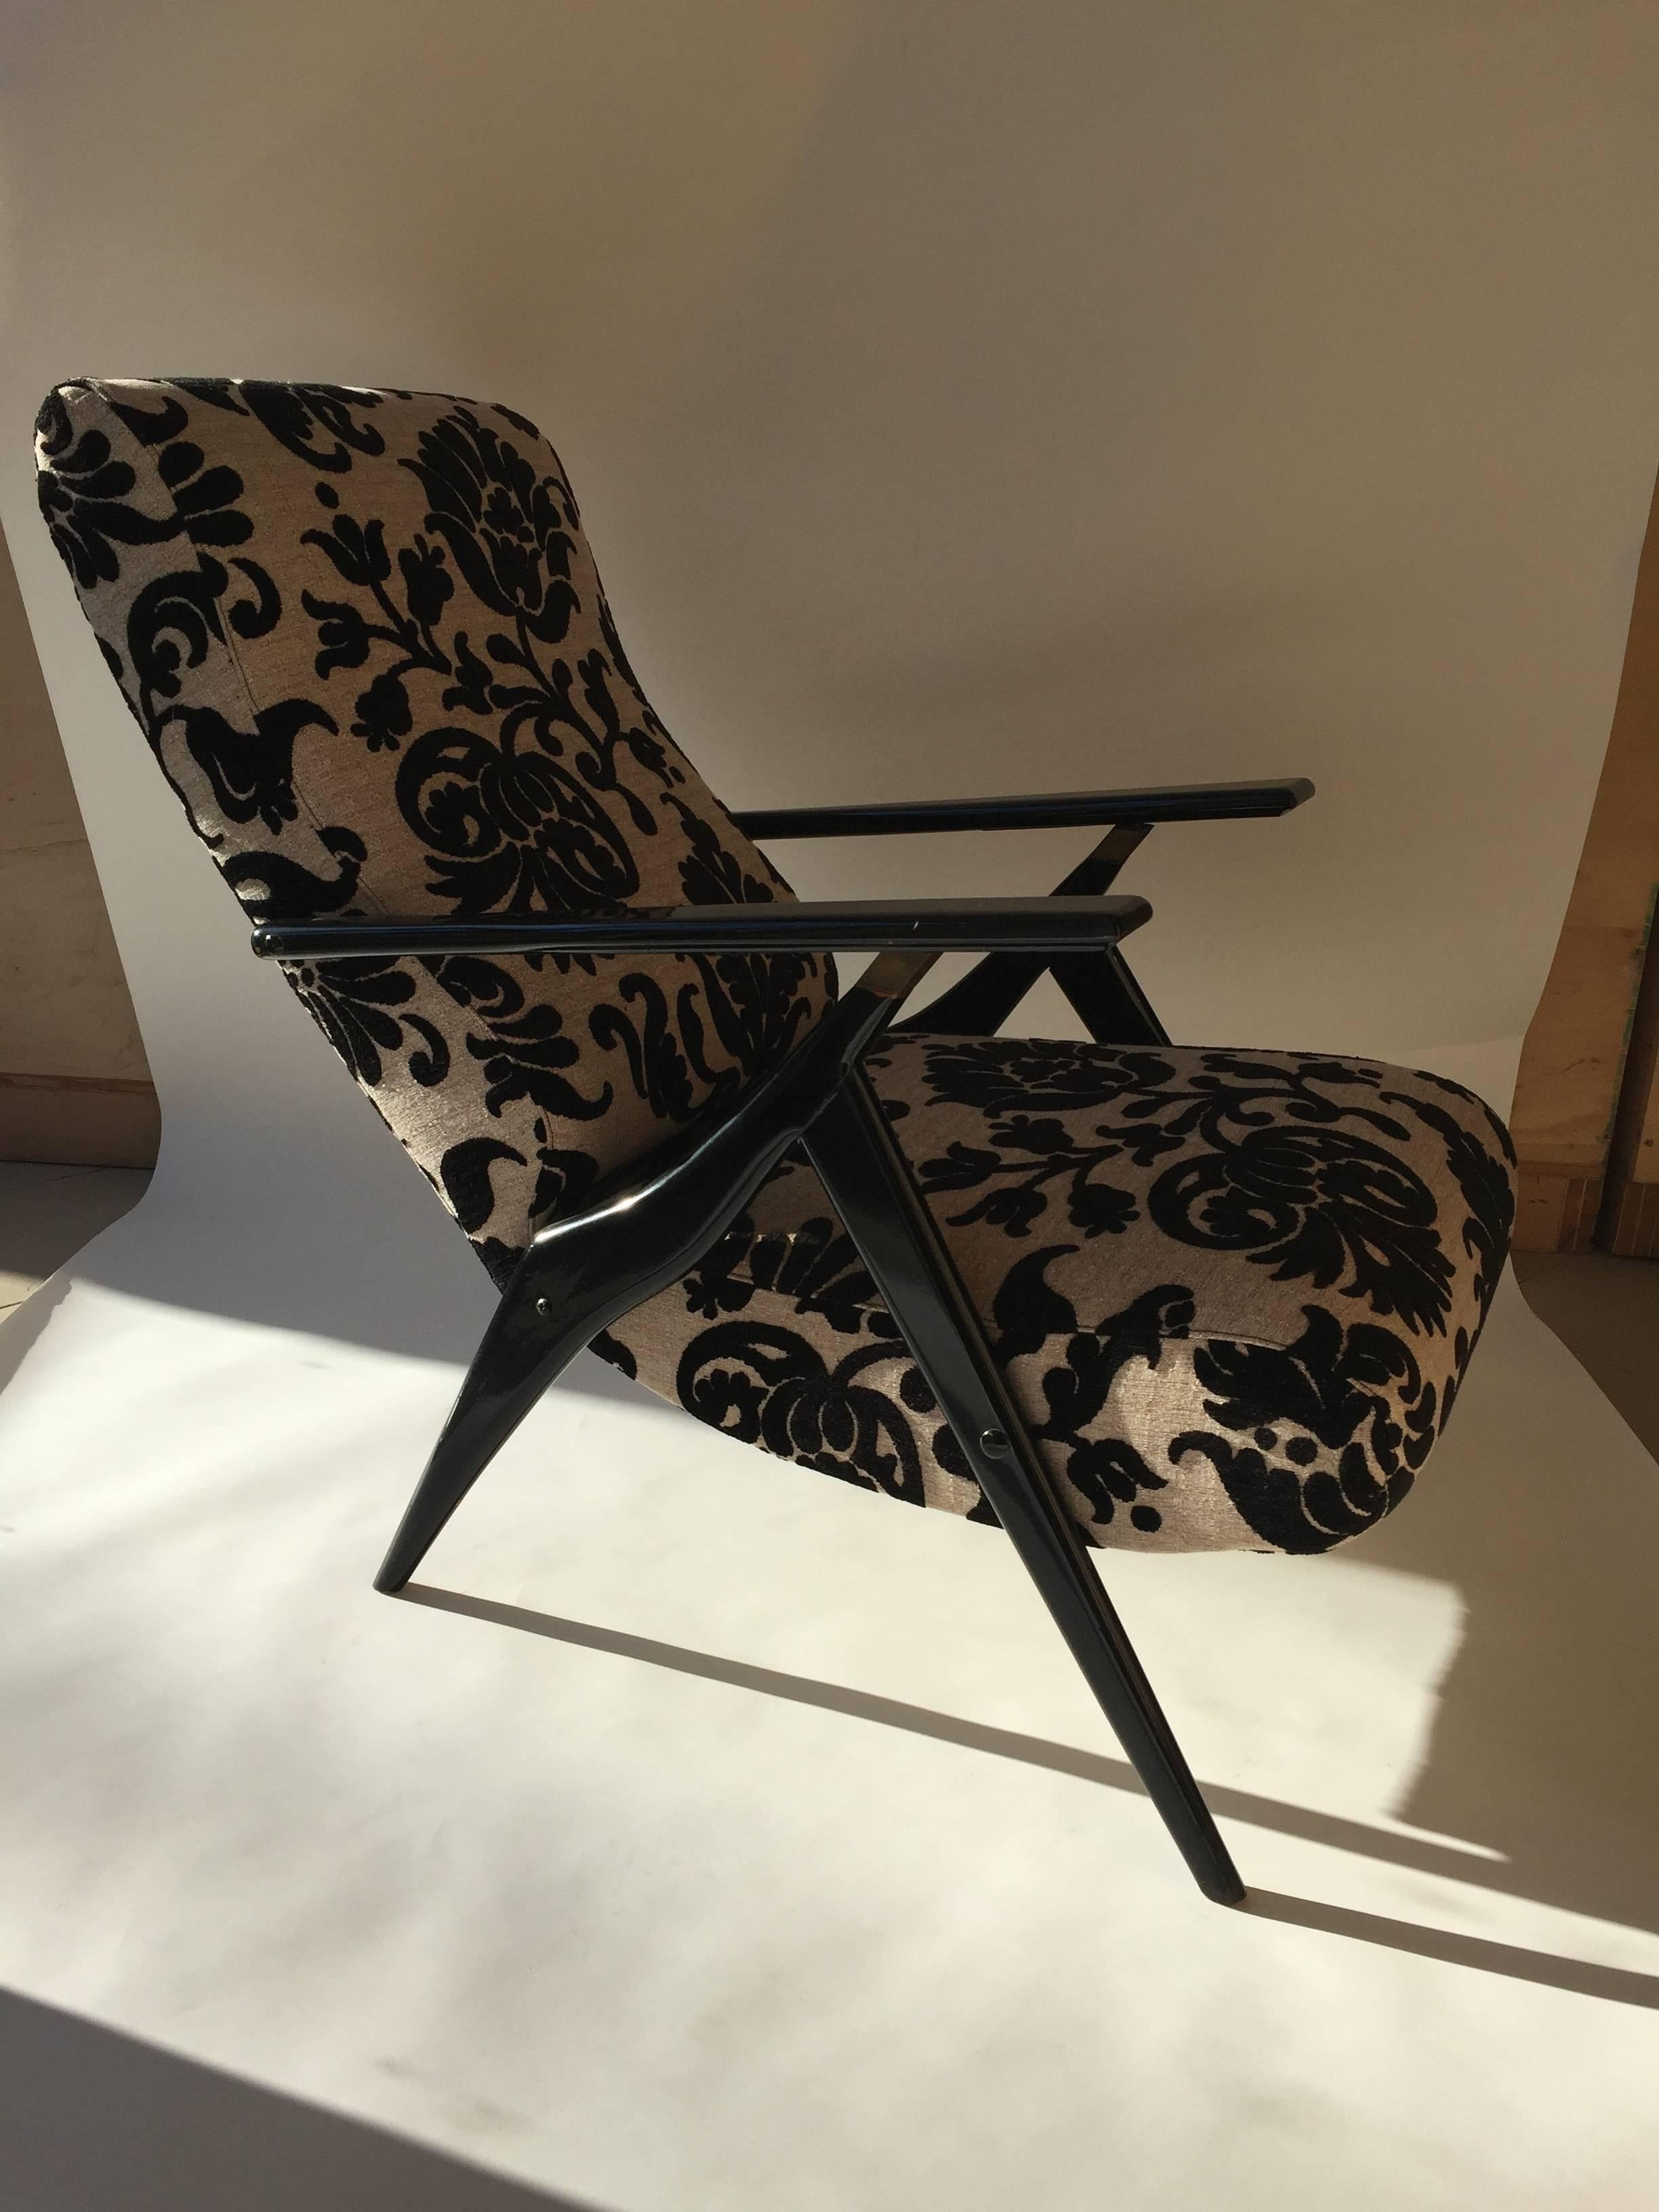 A beautiful Italian lounge chair by Antonio Gorgone, adjustable backrest, upholstered in floral fabric.

Check other beautiful items in our storefront page.